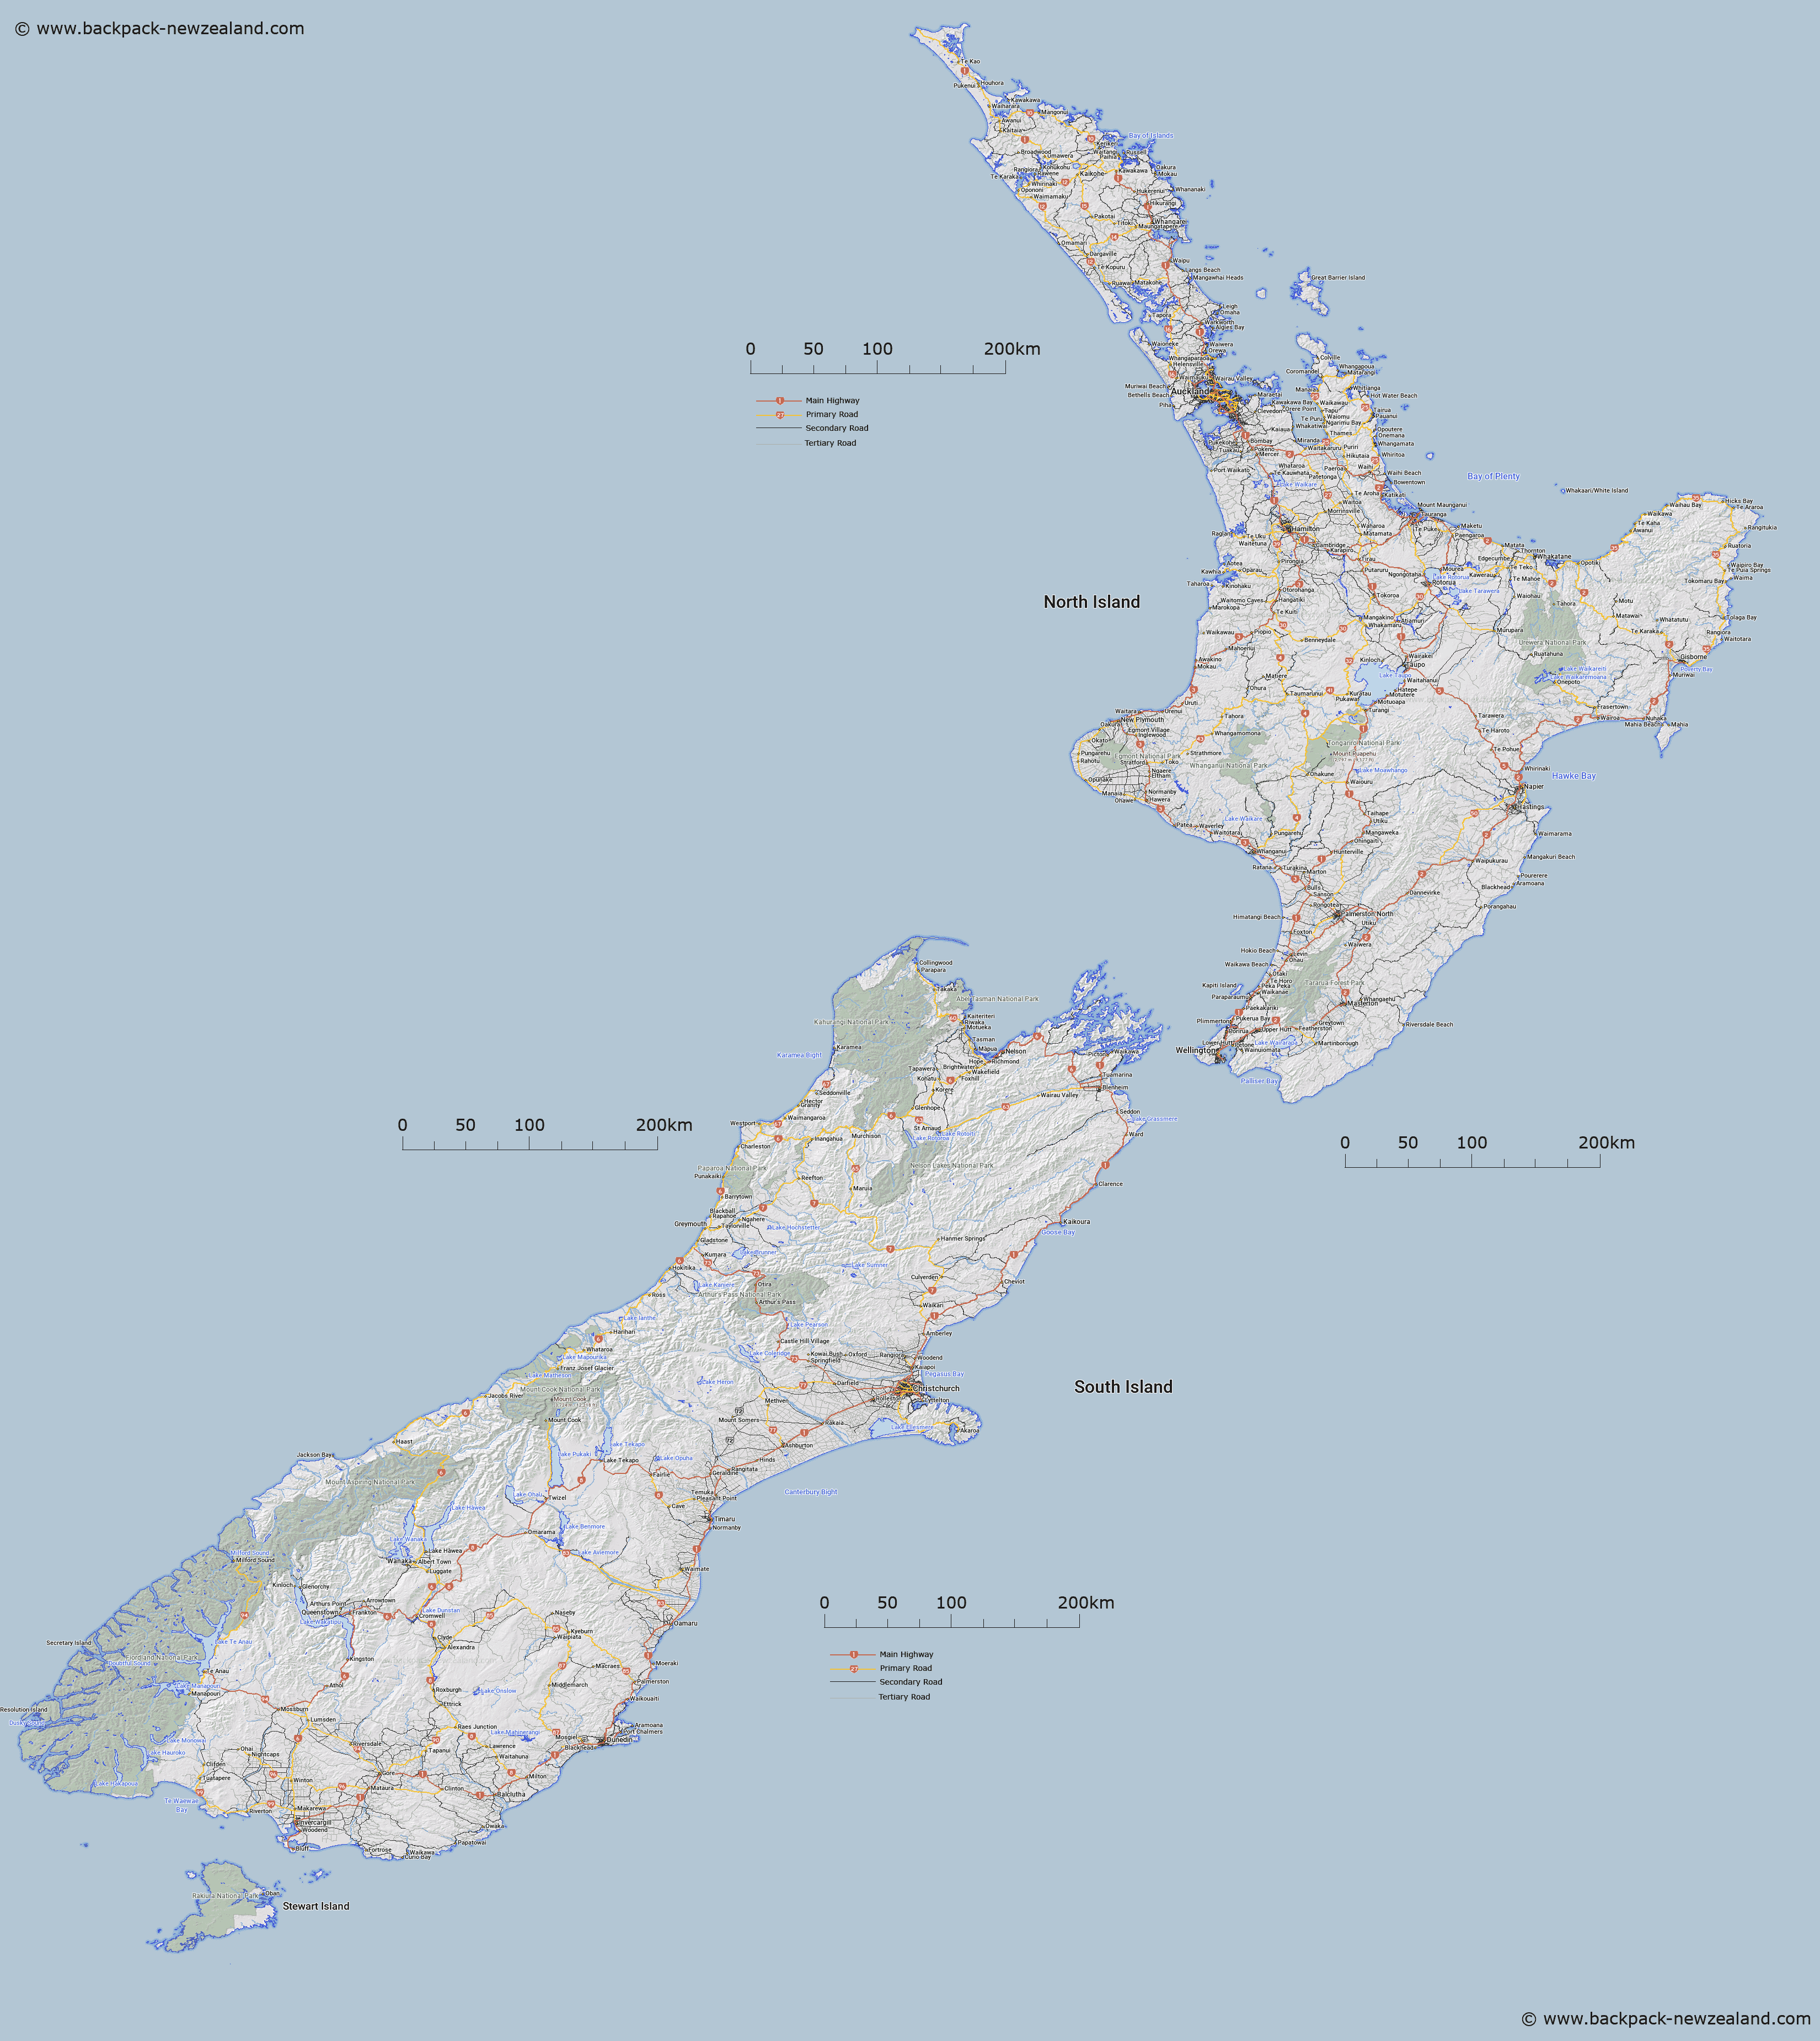 large-map-of-new-zealand-printable-let-me-know